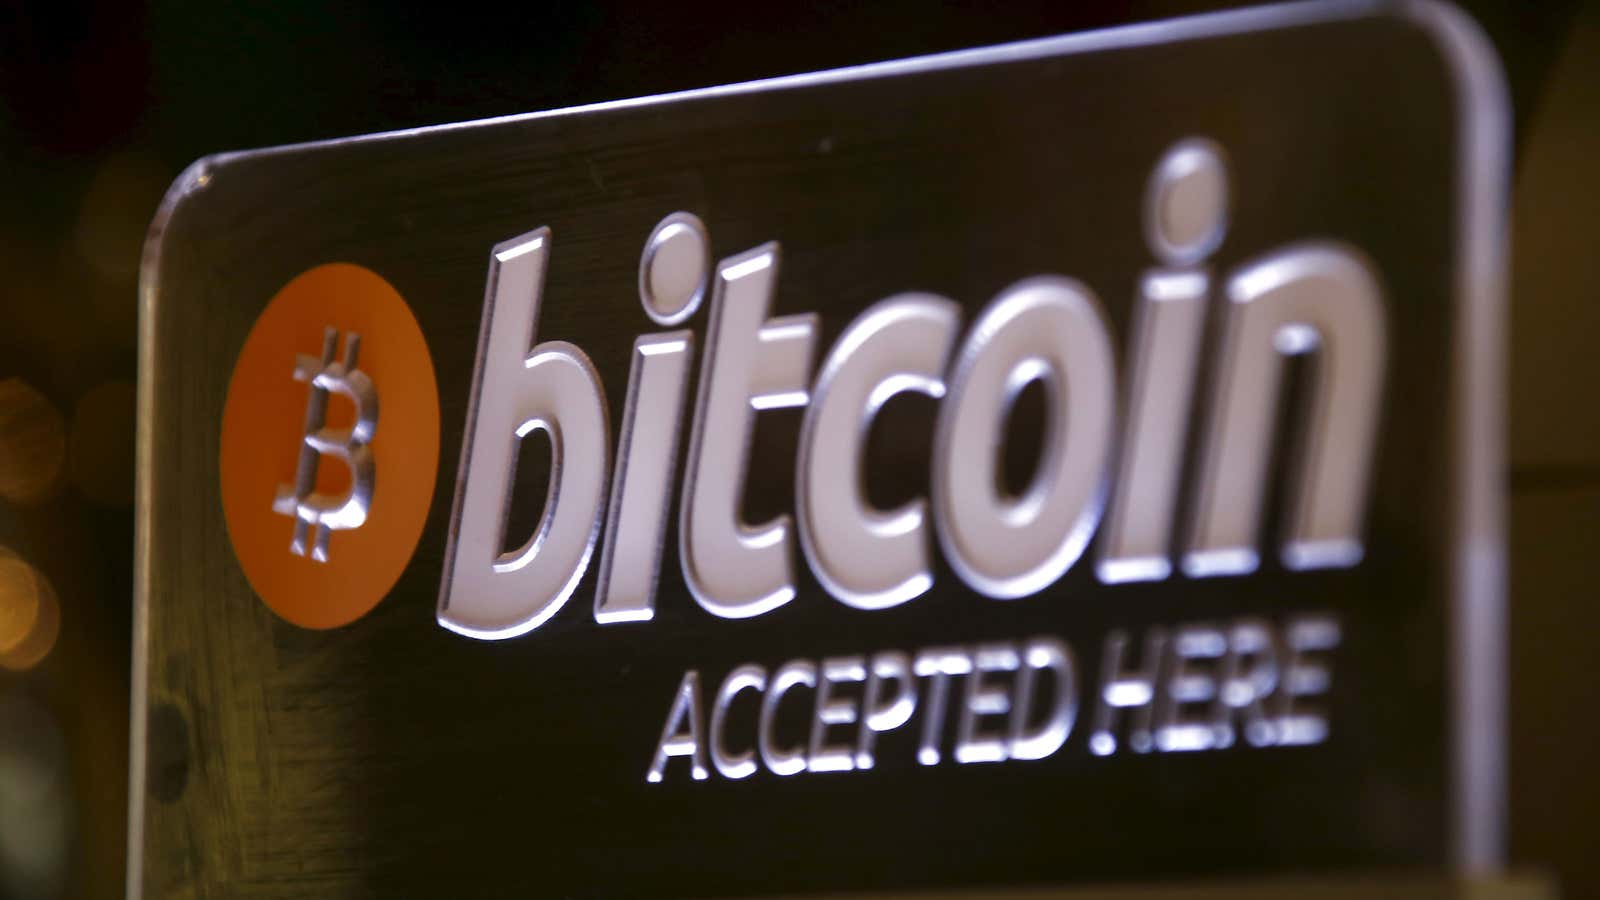 Bitcoin is a virtual currency, but a judge doesn’t think its money quite yet.